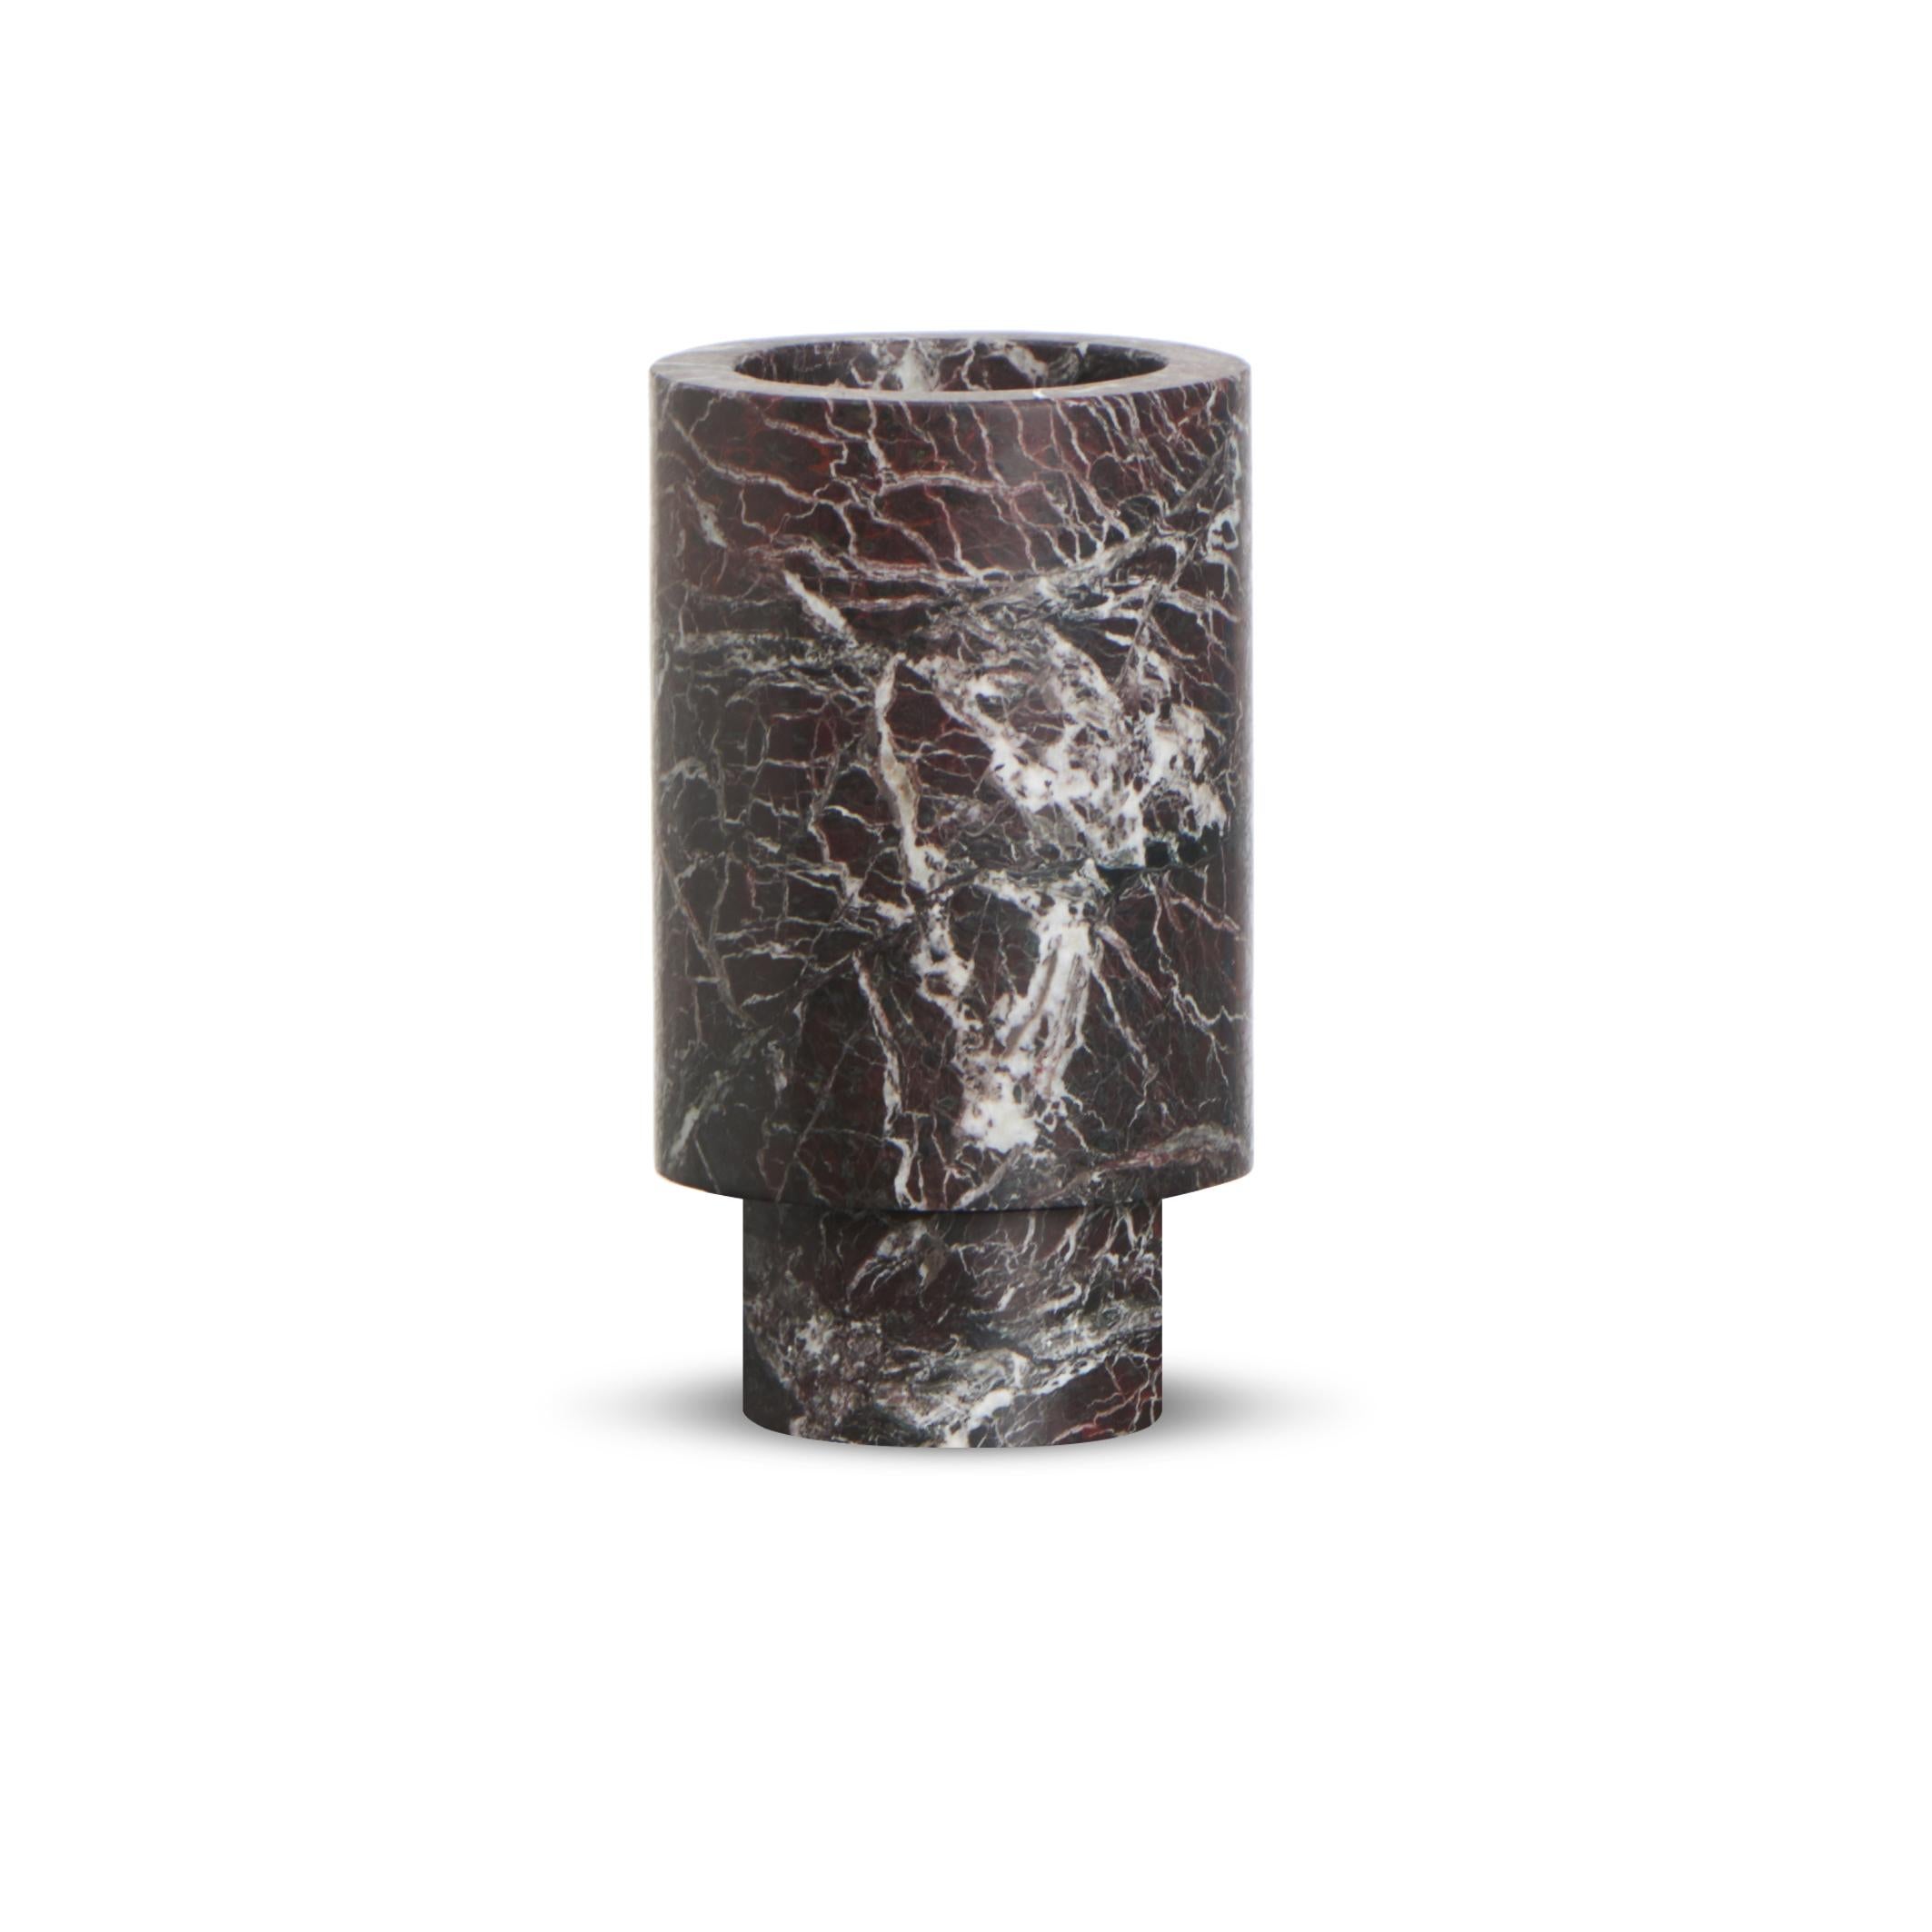 Black inside out vase by Karen Chekerdjian
Dimensions: 8 x 24 cm
Materials: Nero Marquinia


Karen’s trajectory into designing was unsystematic, comprised of a combination of practical experience in various creative fields and